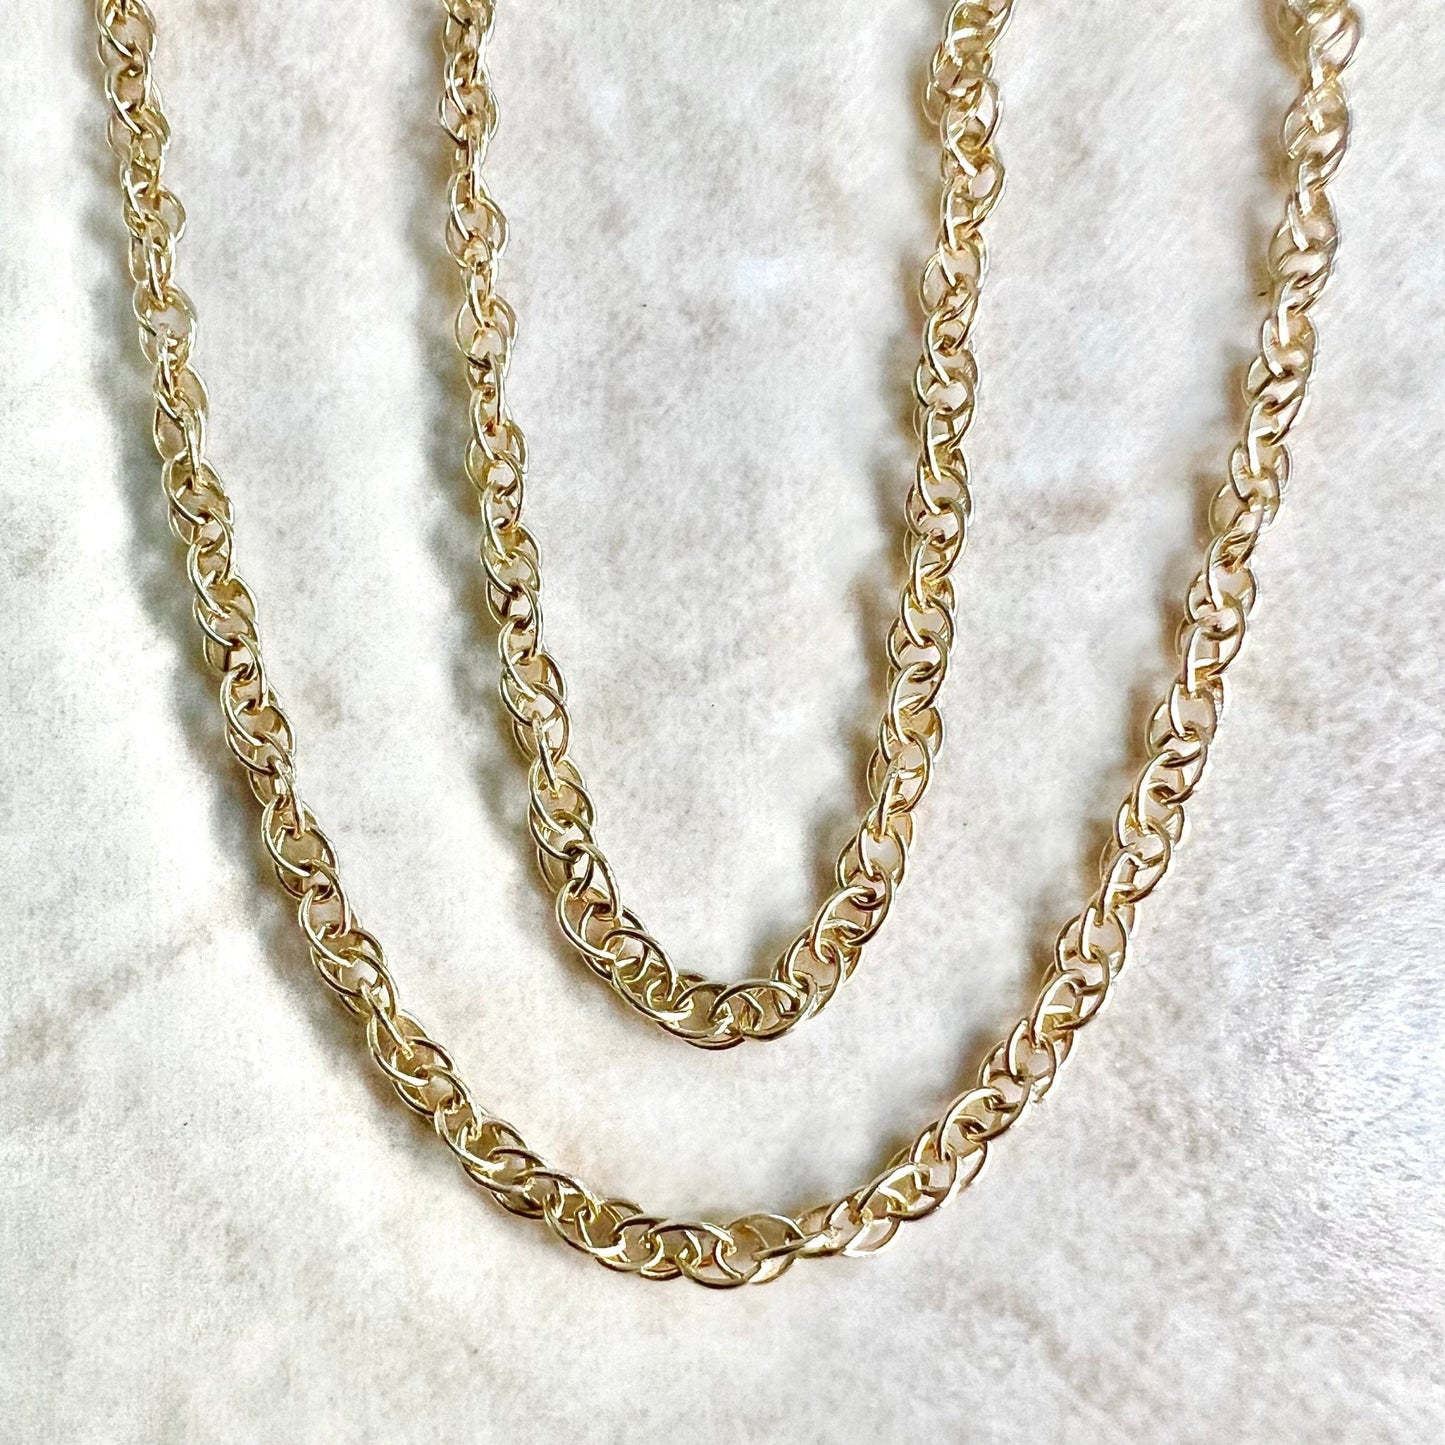 14K Solid Gold Rope Chain Necklace - 18 Inch Gold Chain - 14K Yellow Gold Chain - Gold Necklace - Best Gift For Her - Best Christmas Gifts